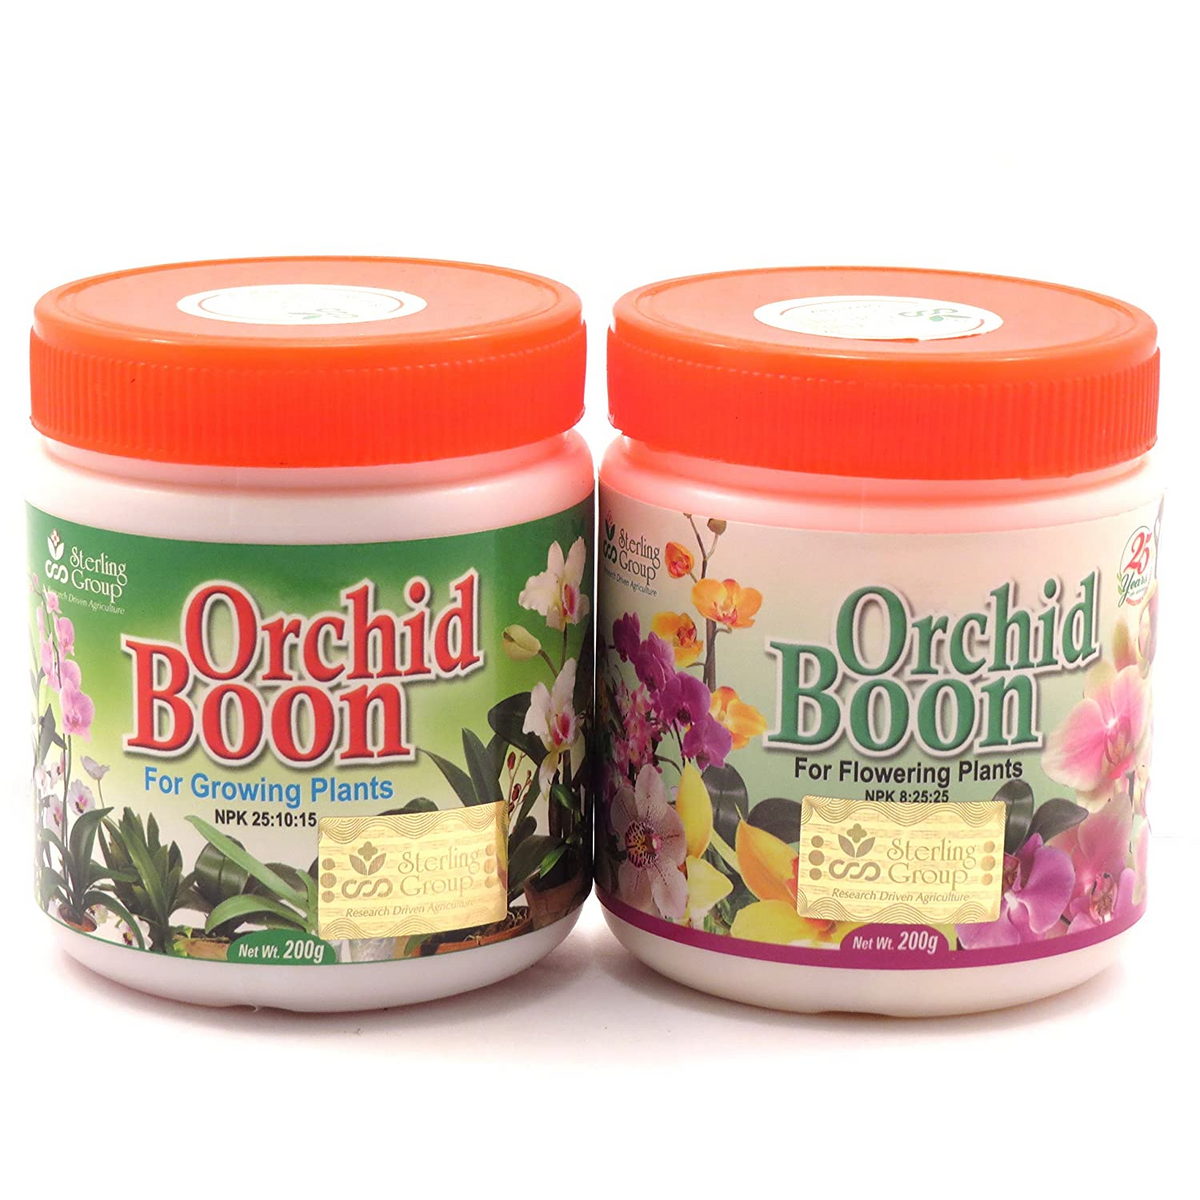 Orchid Boon - Fertilizer Kit (for orchid flowering and growth)